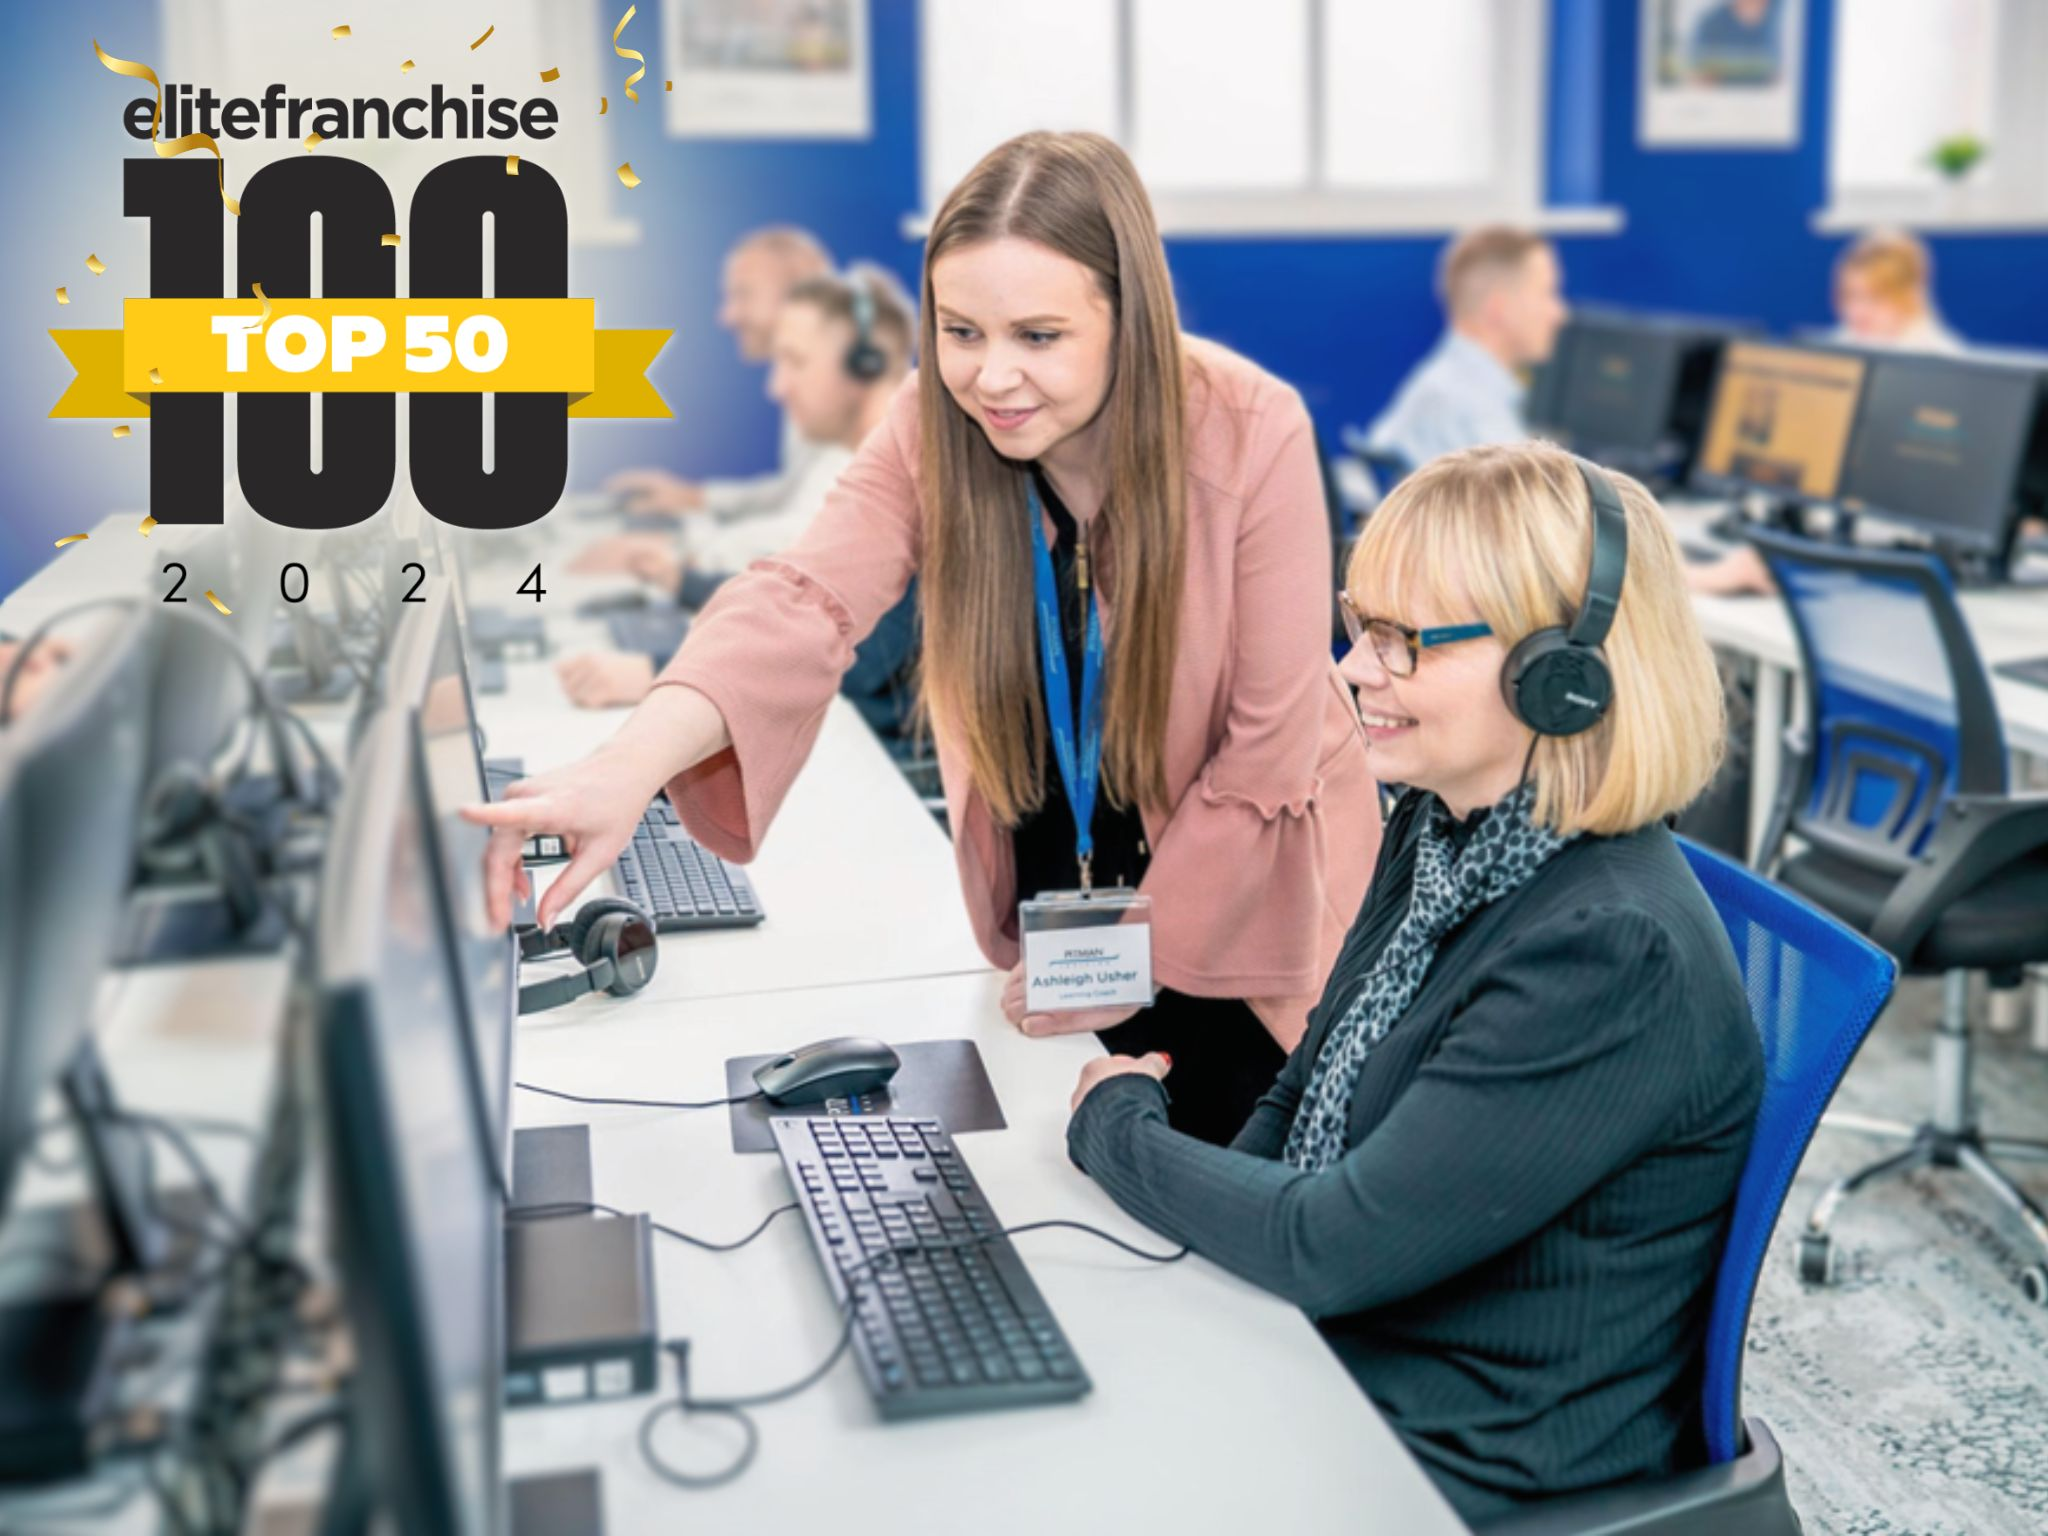 Pitman Training Innovation and Support for Franchise Partners